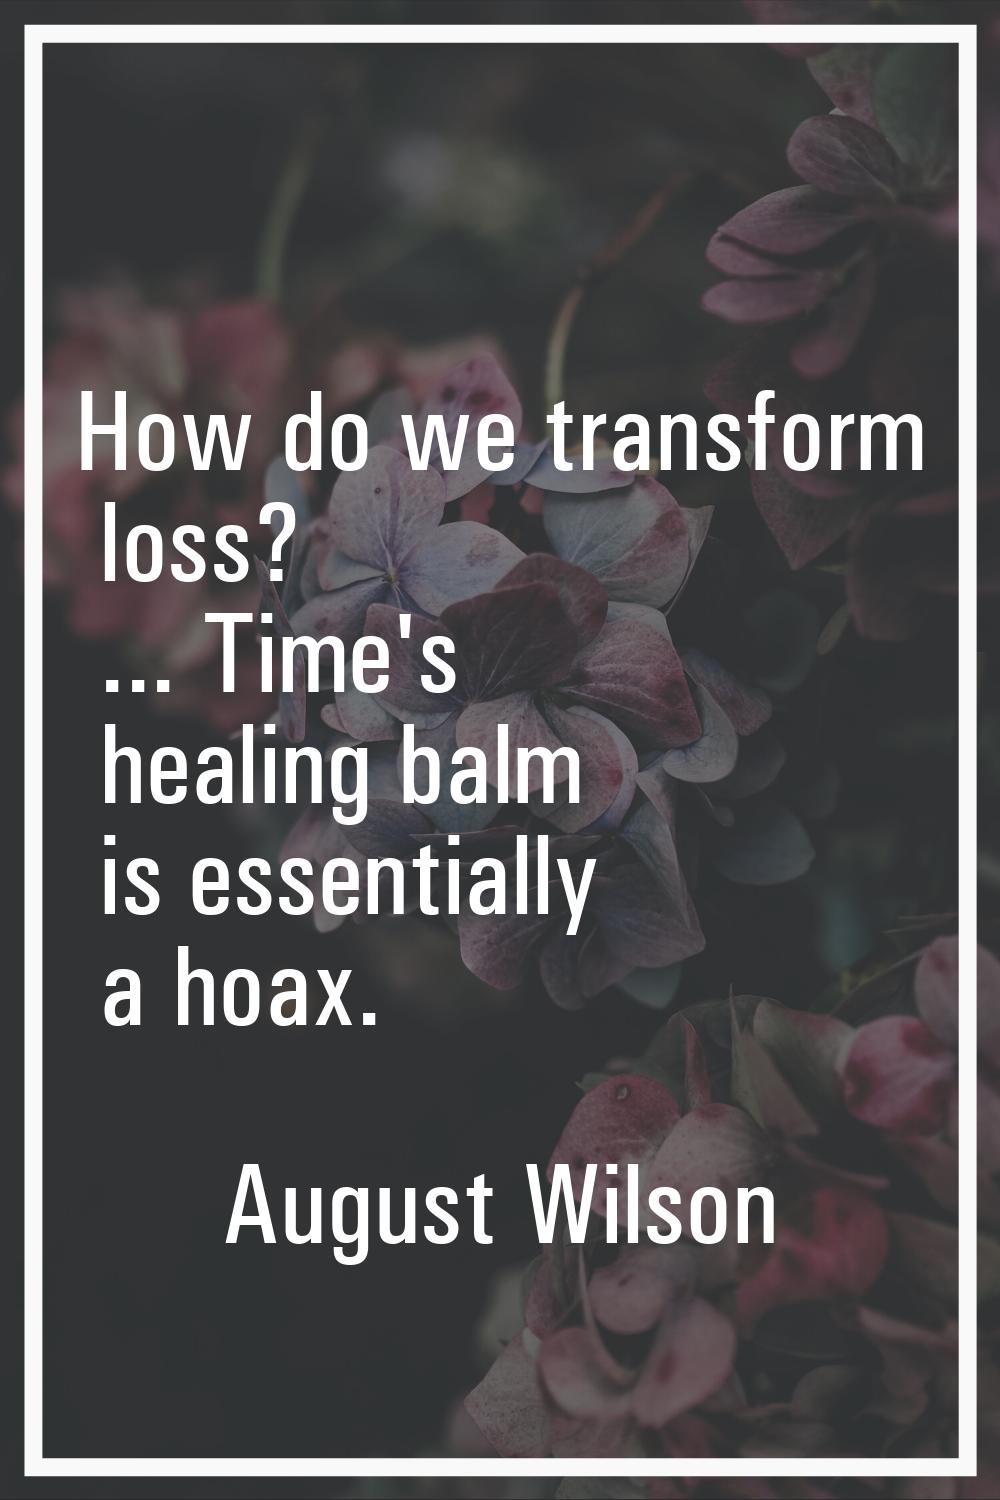 How do we transform loss? ... Time's healing balm is essentially a hoax.